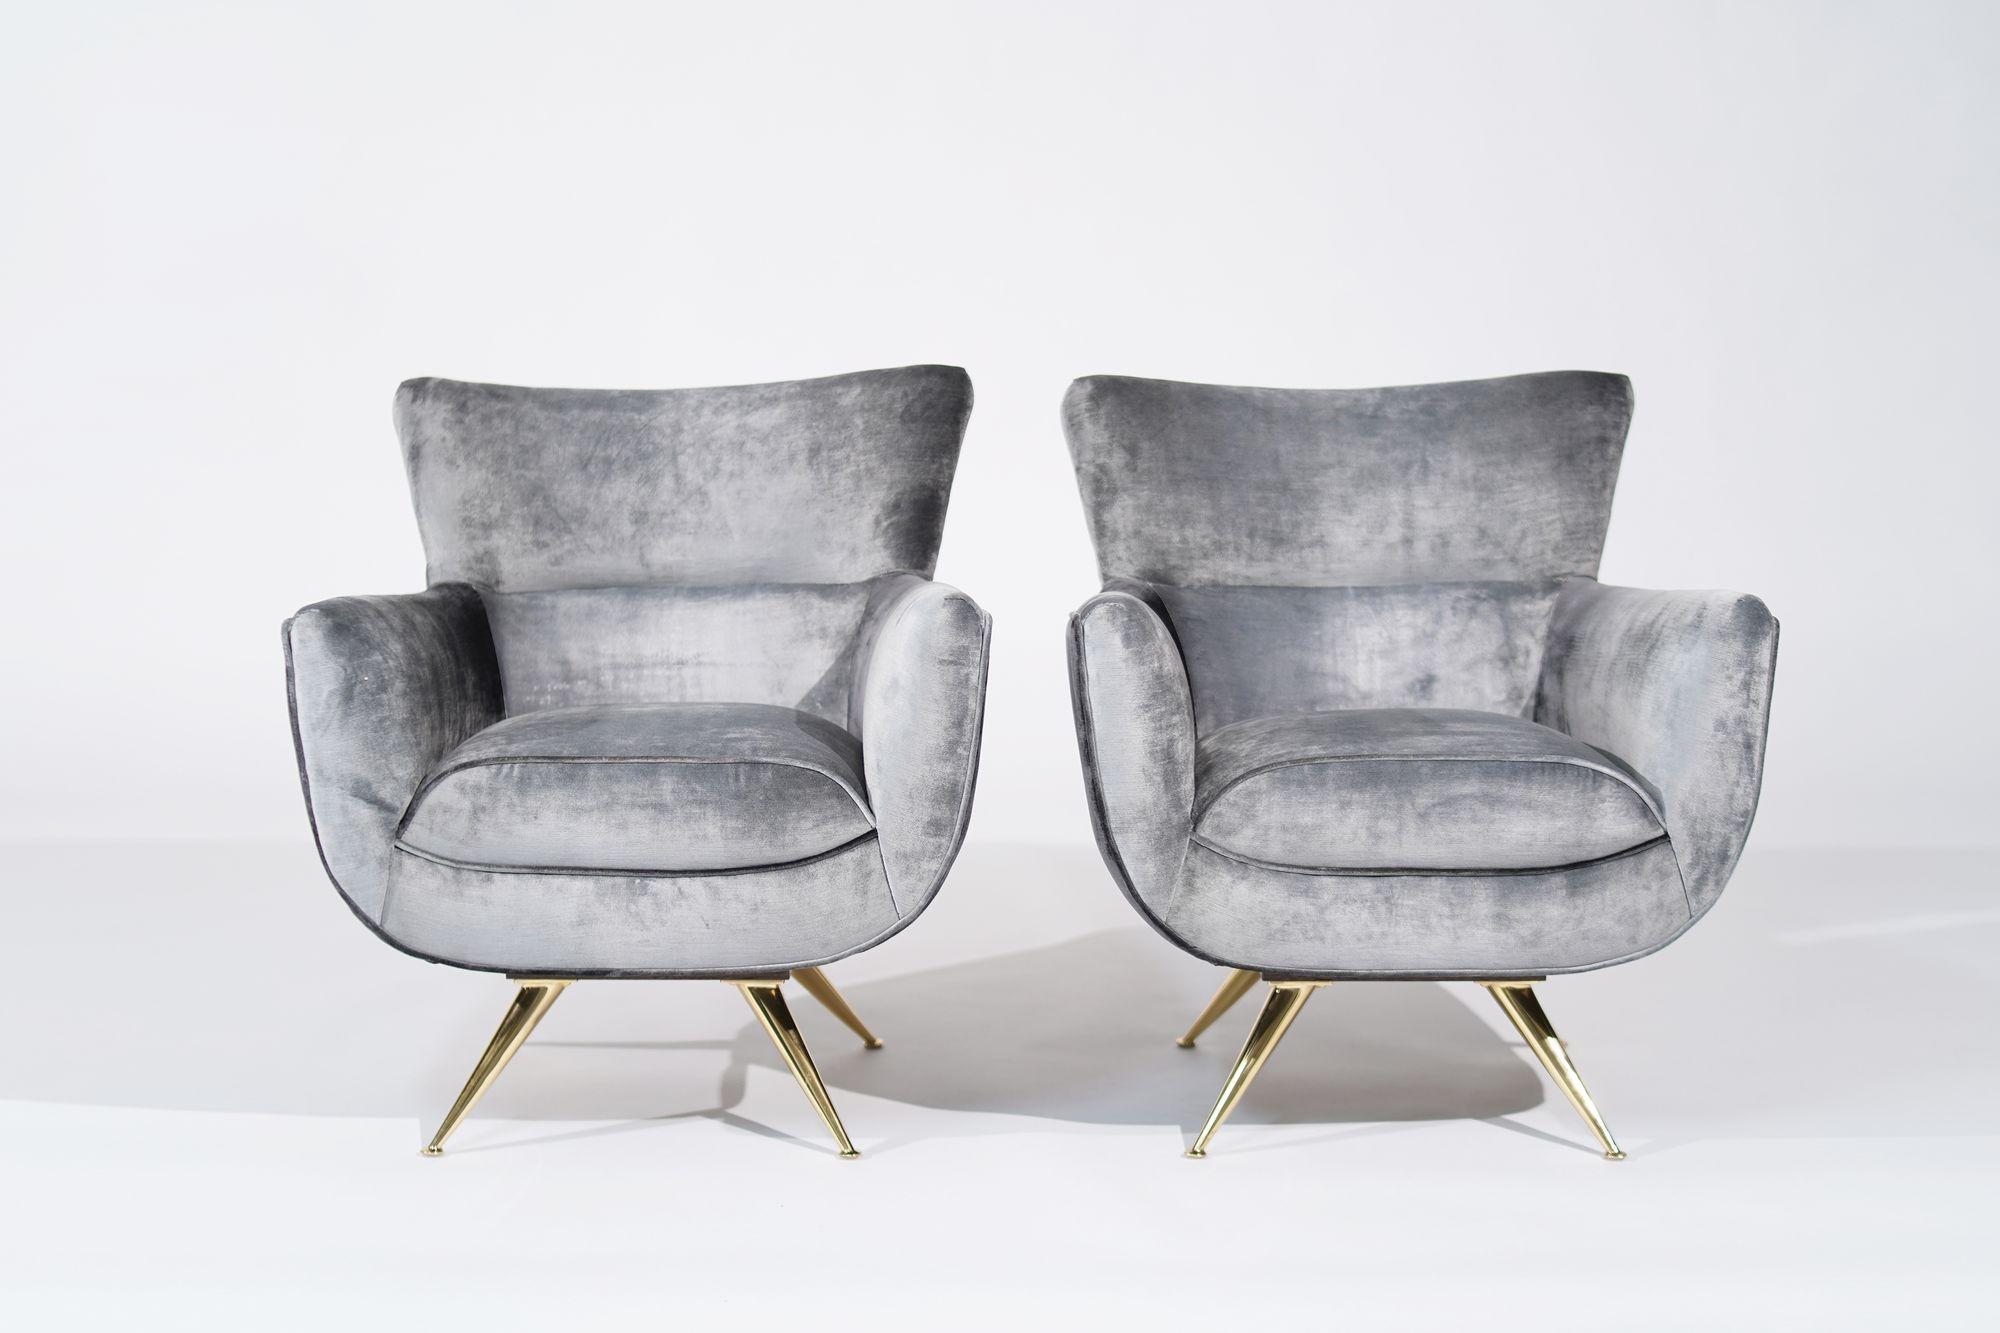 Henry Glass Swivel Chairs in Distressed Silver Velvet, C. 1950s For Sale 1